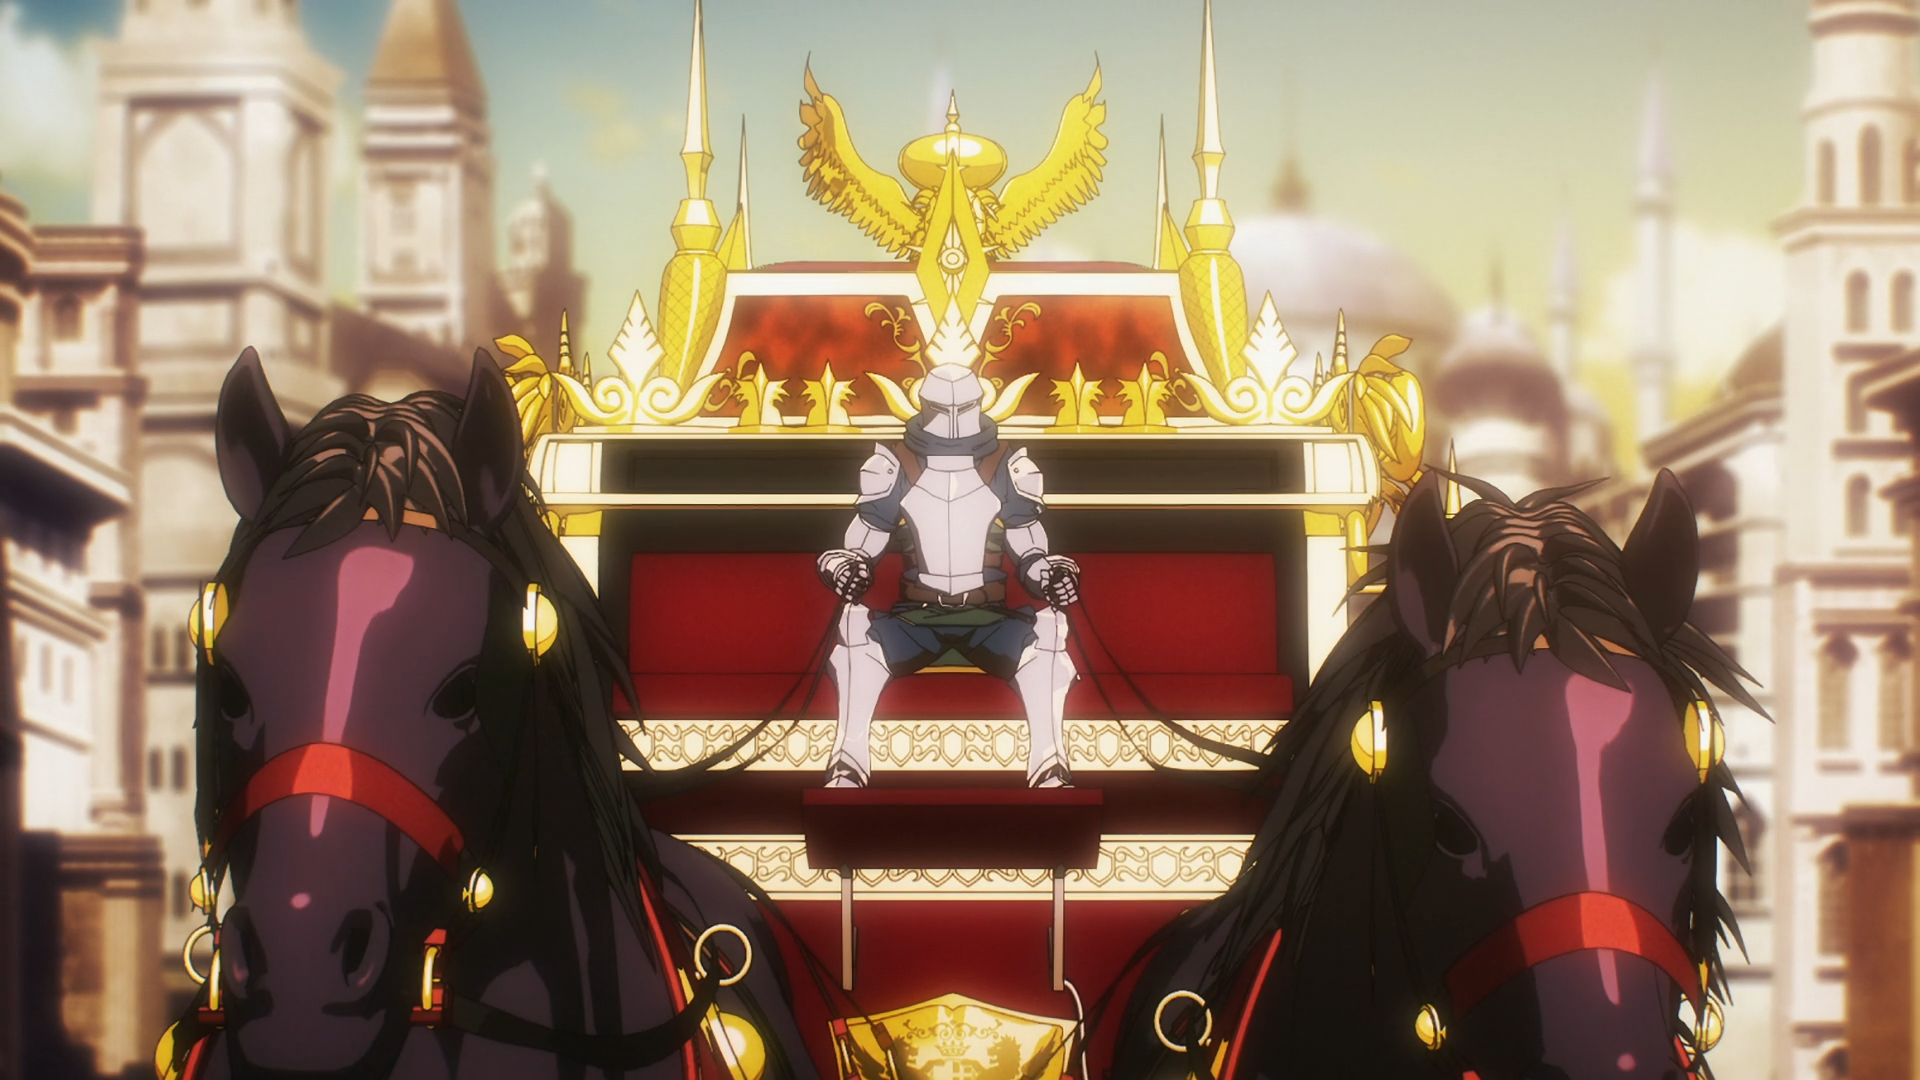 Opinion on 4 episodes of season 4 of Overlord - Overlord, Anime, Ainz ooal gown, Albedo, Mare Bello Fiore, Aura Bella Fiora, Review, Spoiler, Video, Longpost